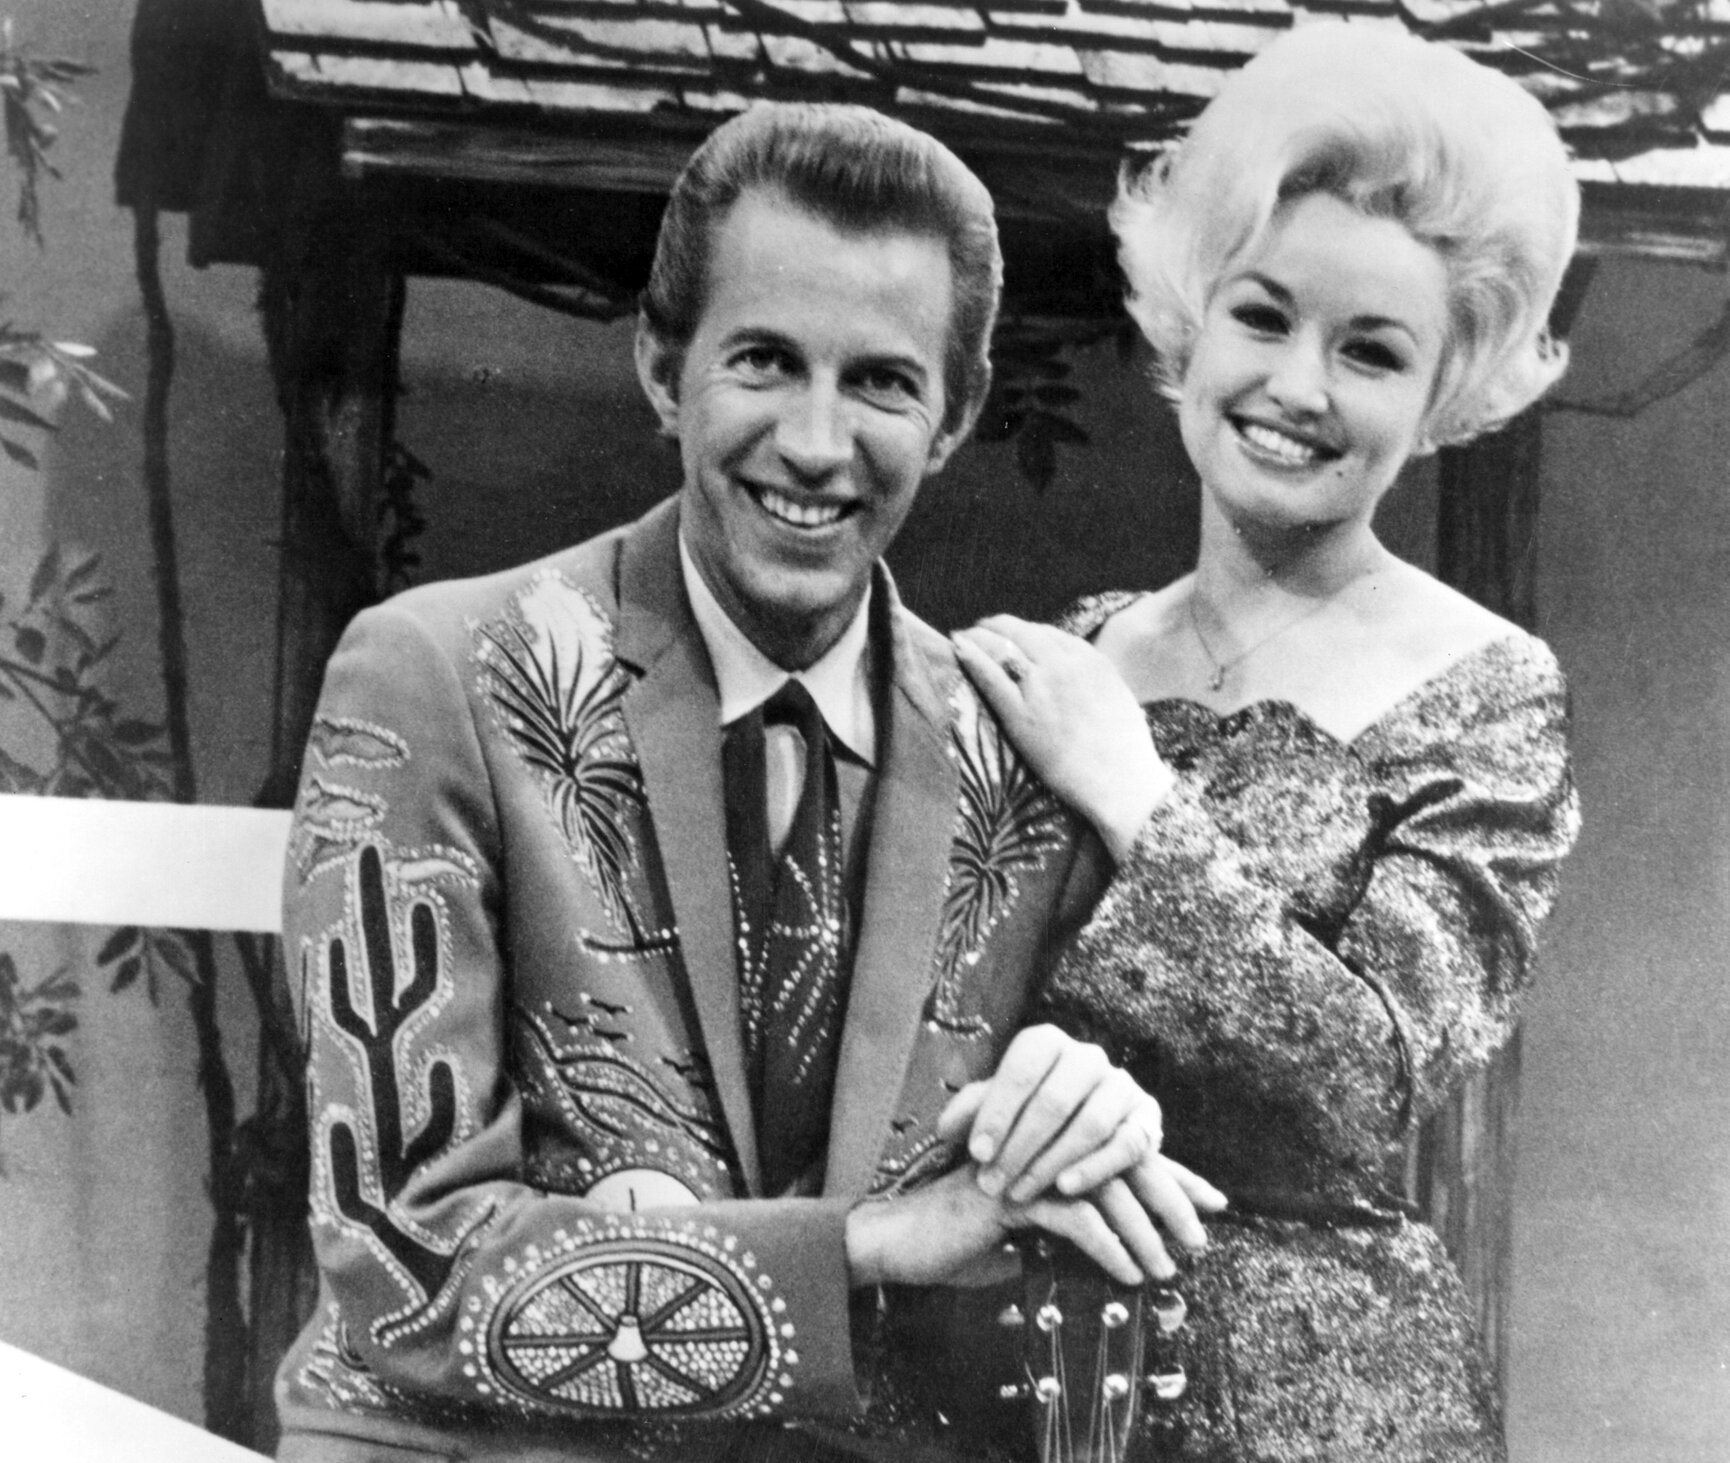 Country singer Dolly Parton with her collaborator Porter Wagoner on the set of his TV show in 1967.